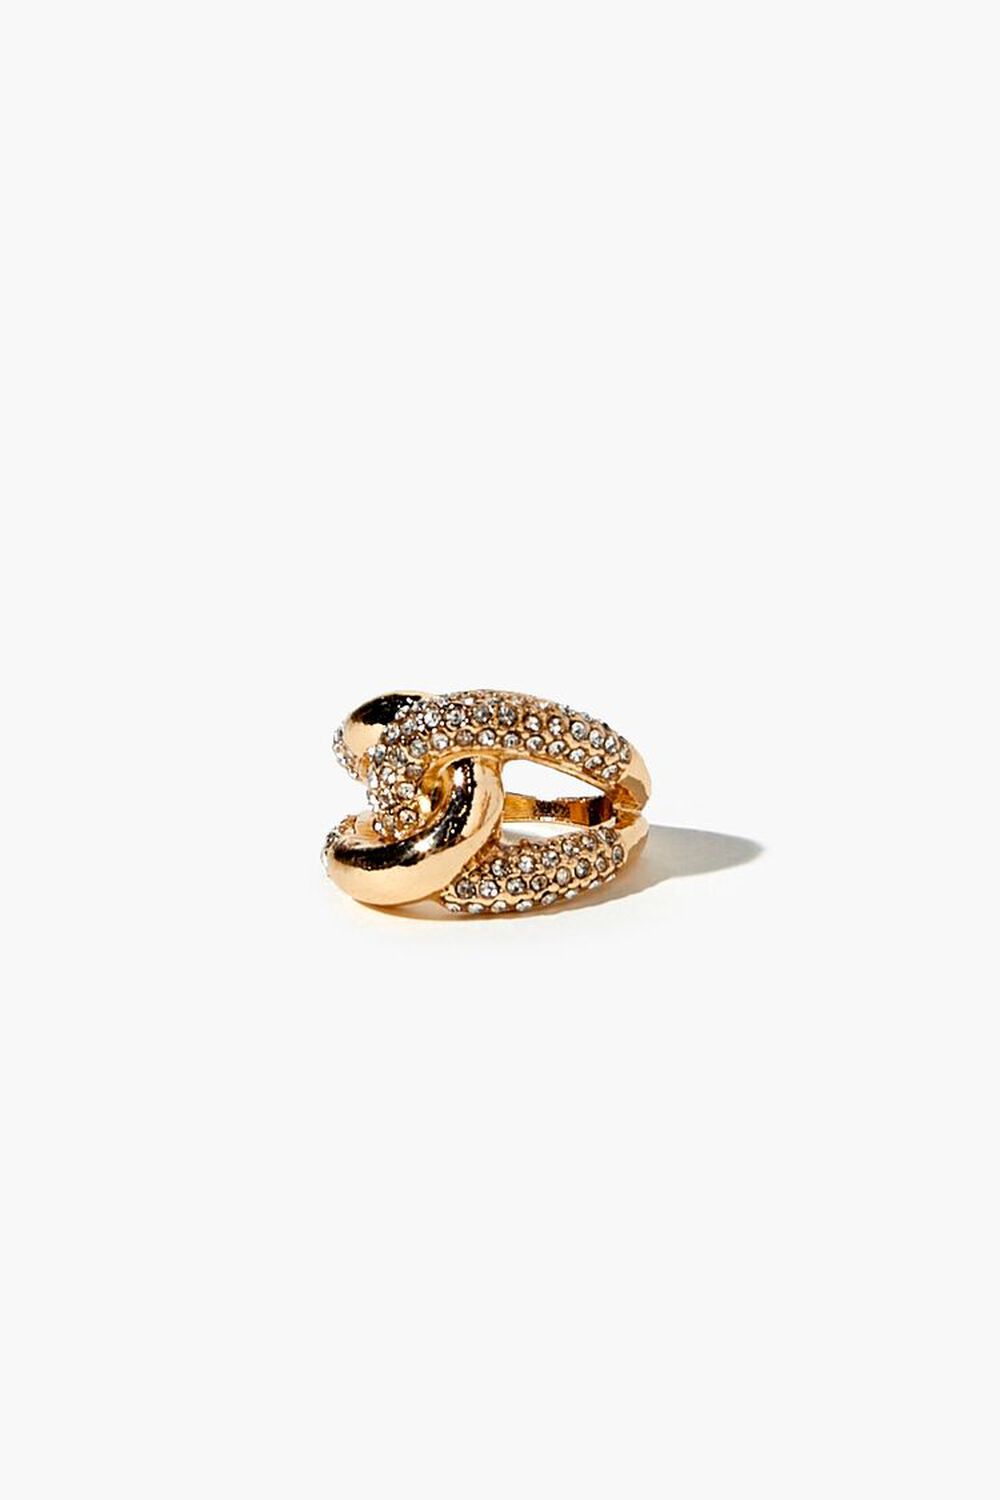 GOLD/CLEAR Rhinestone Cocktail Ring, image 2